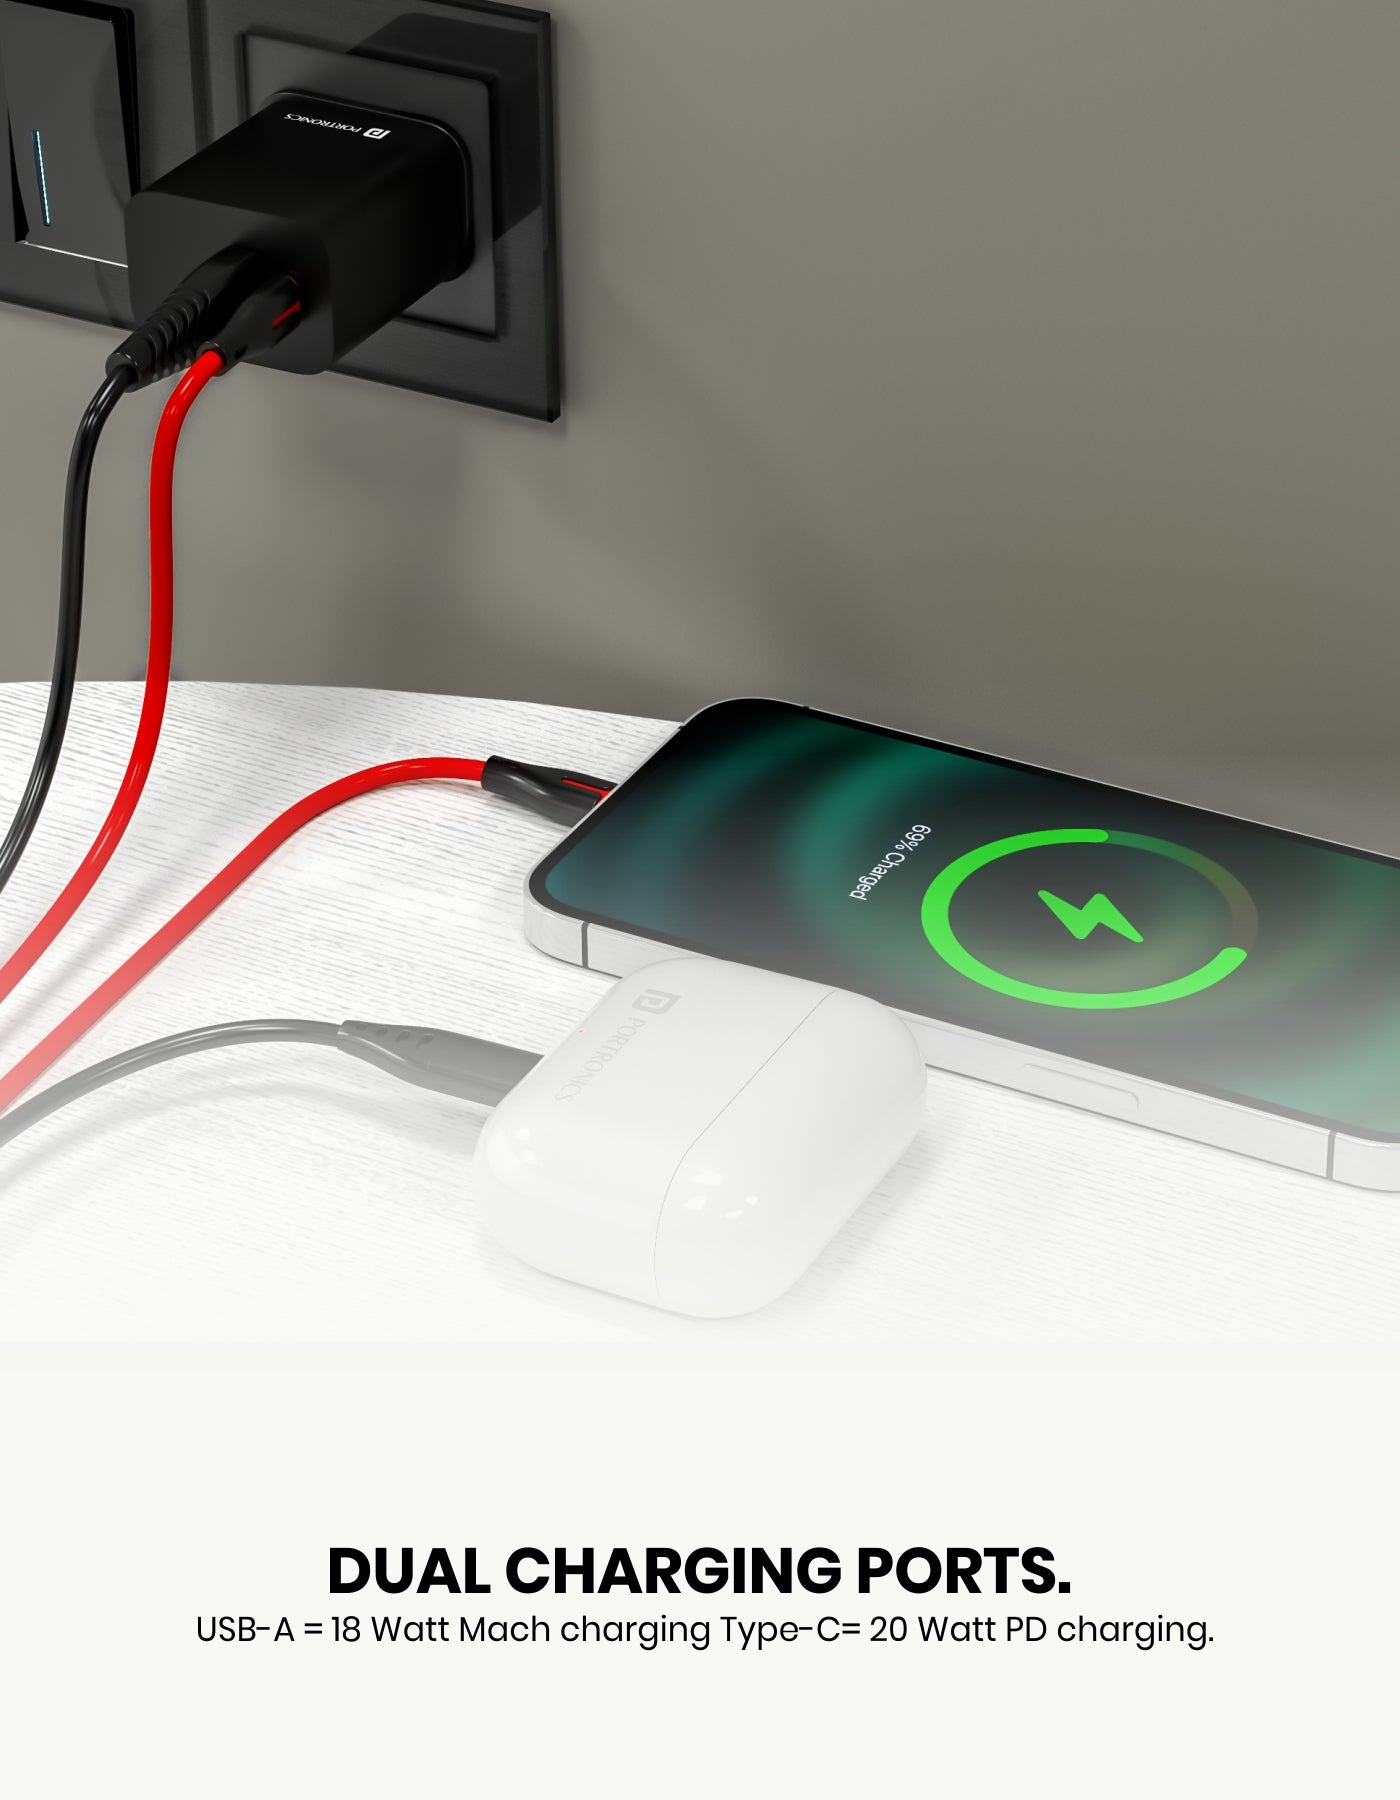 Precise fast charging